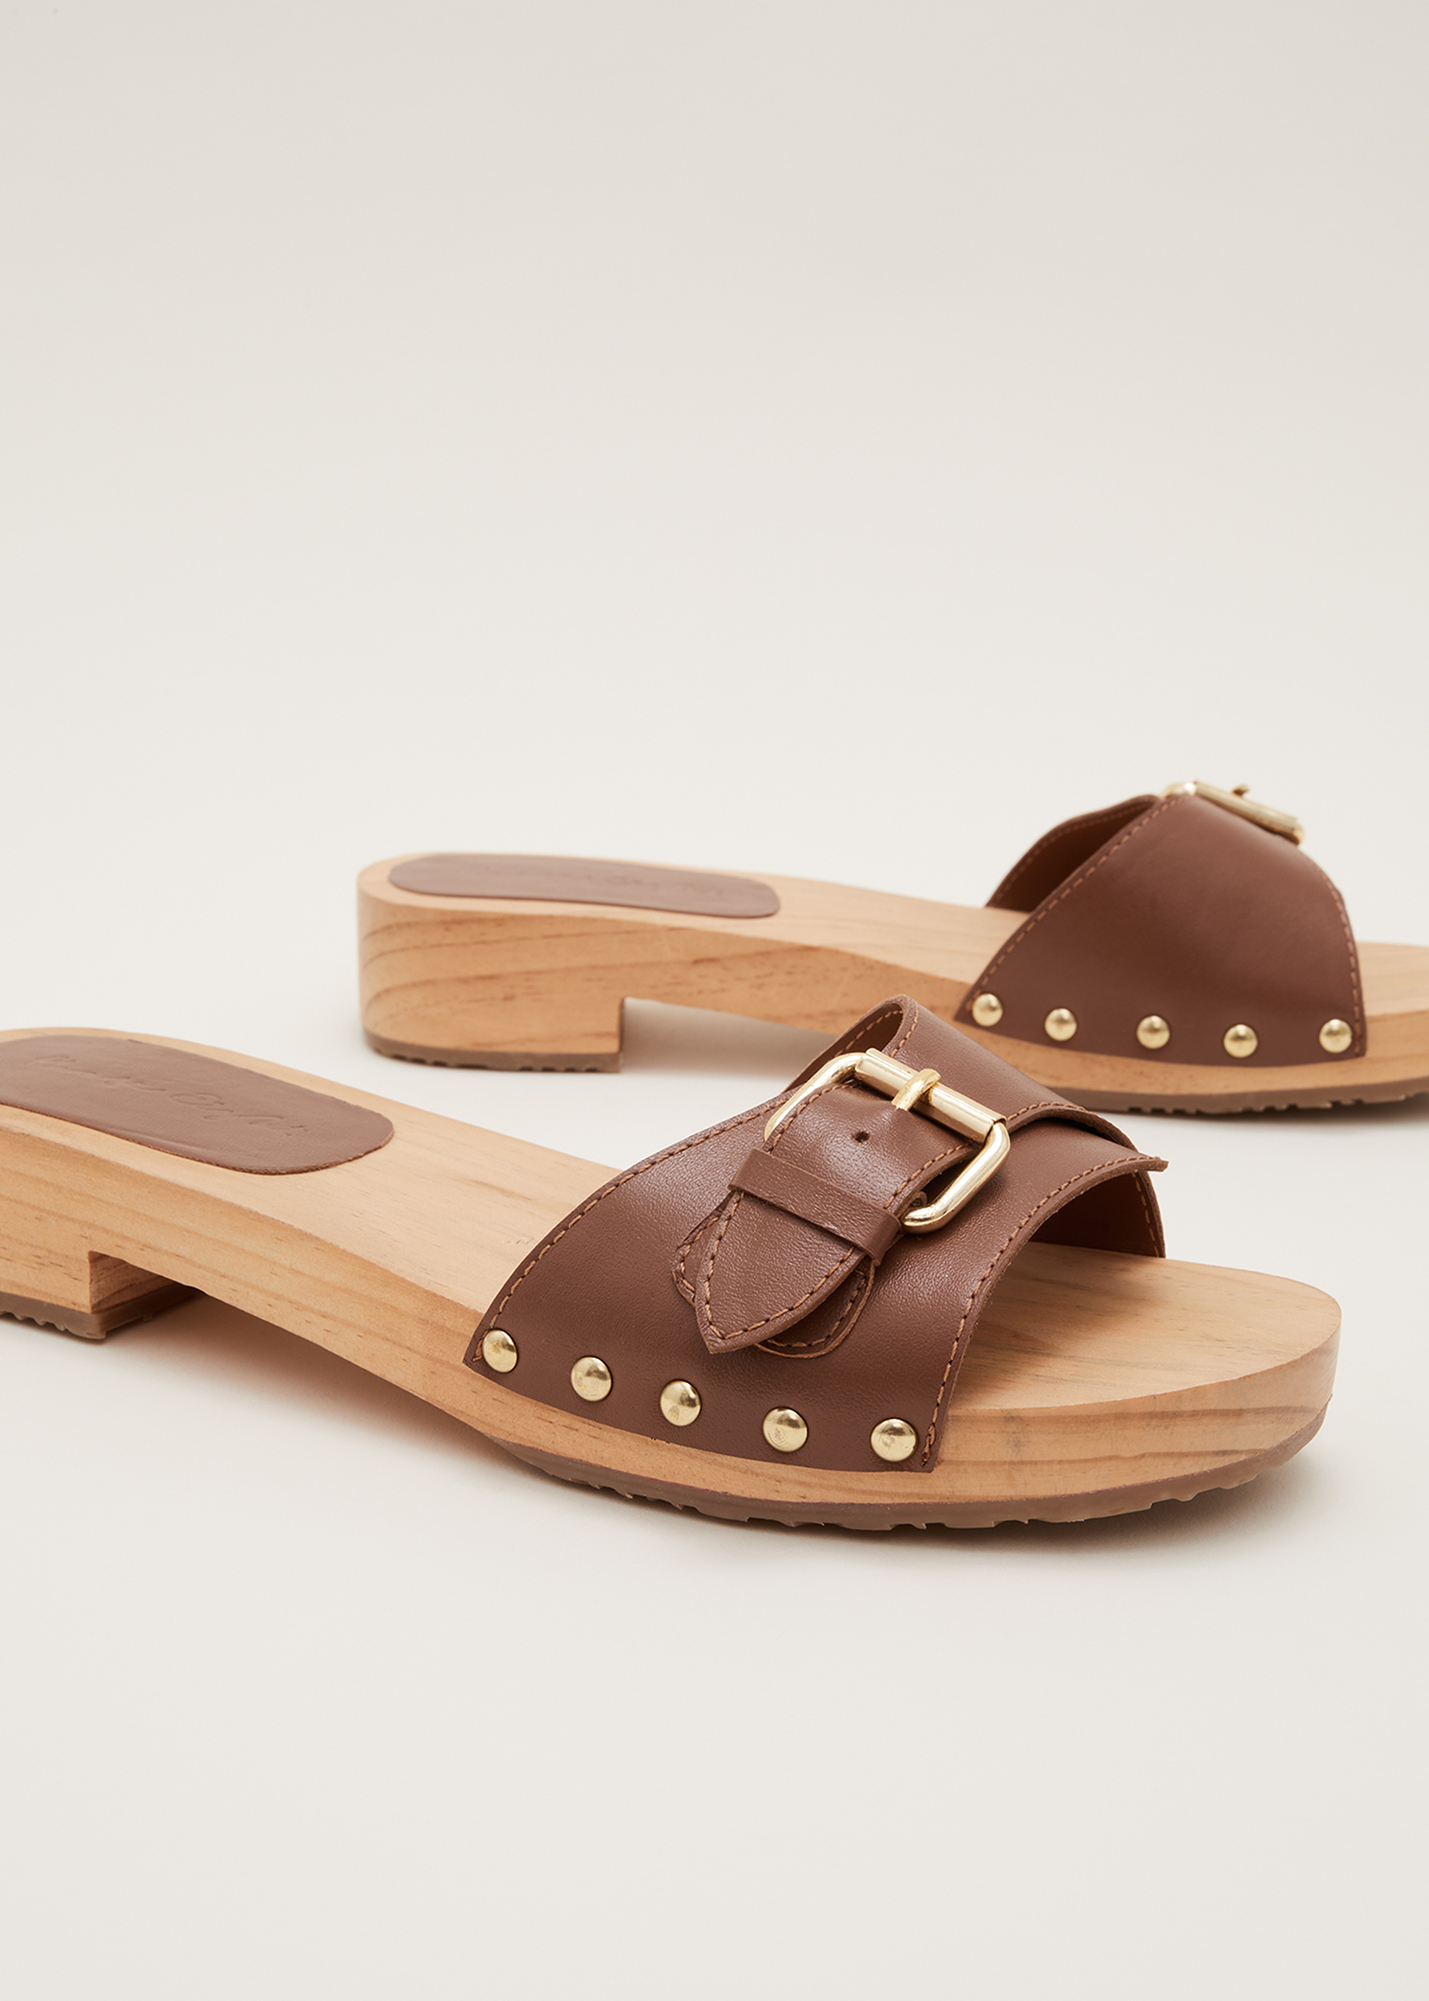 Tan leather clog with buckle